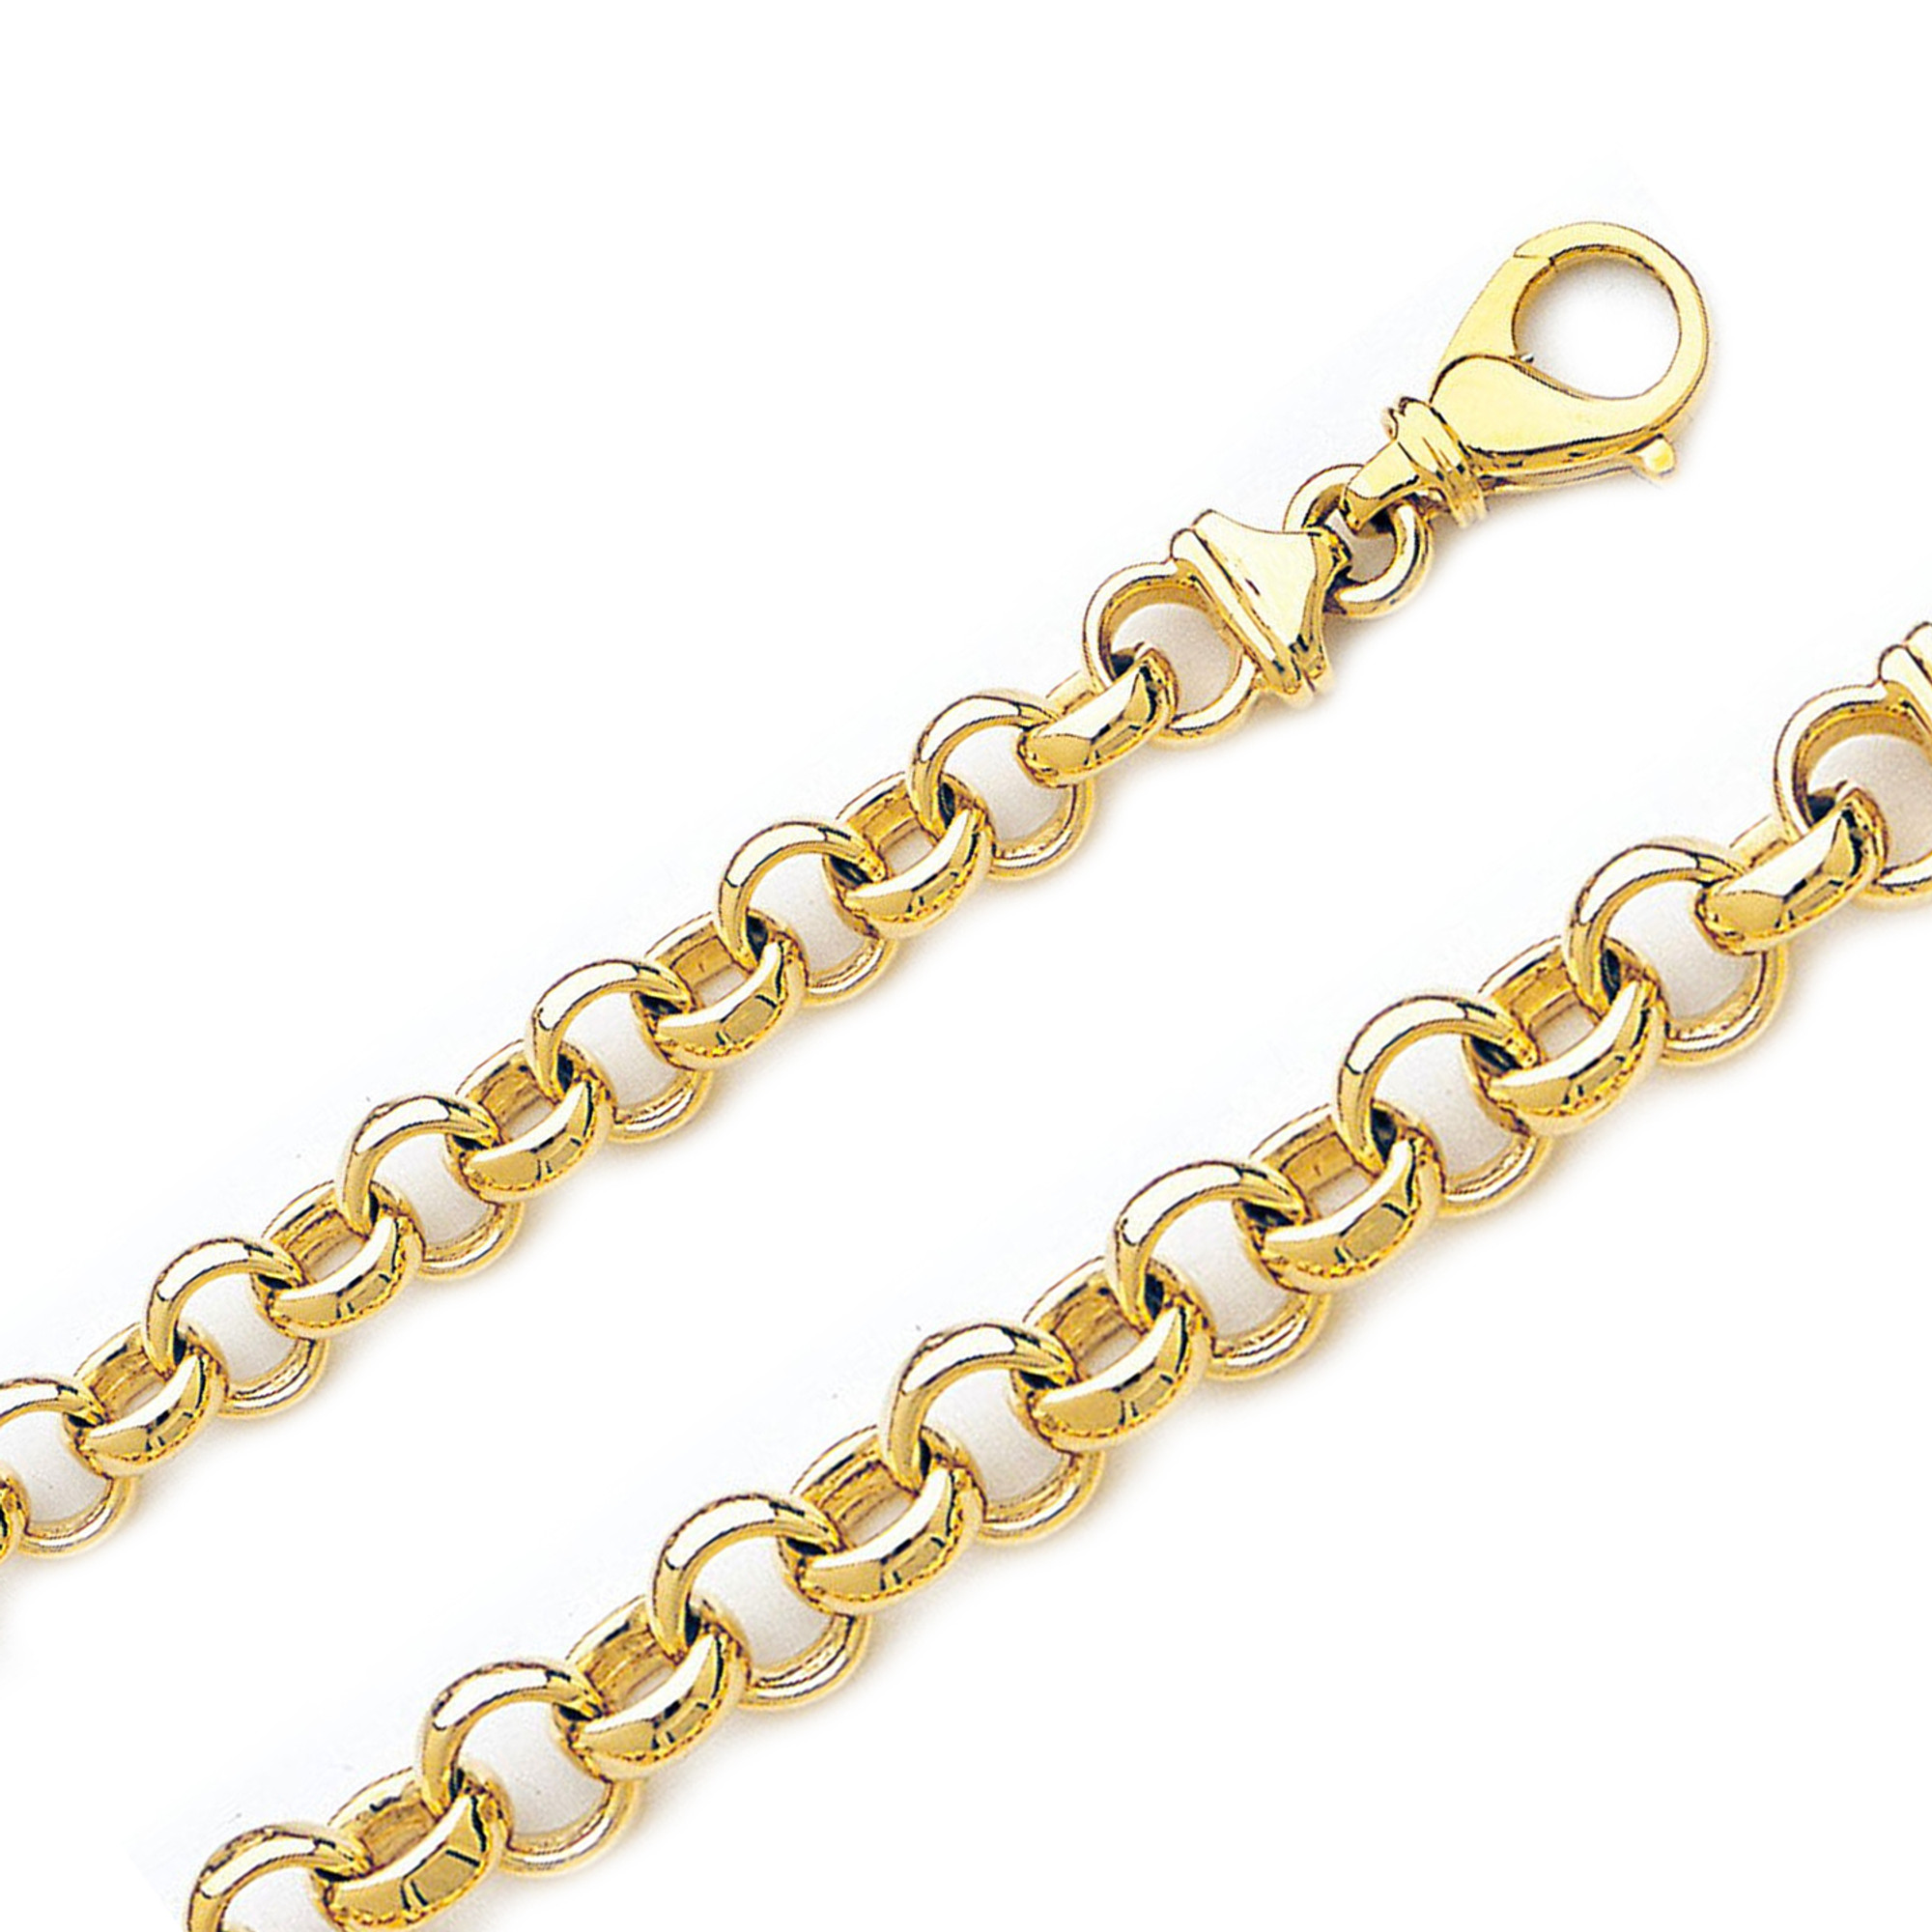 Sterling Silver Diamond Cut Rope Chain Necklace in 8mm Width. Available in  6 Chain Lengths.